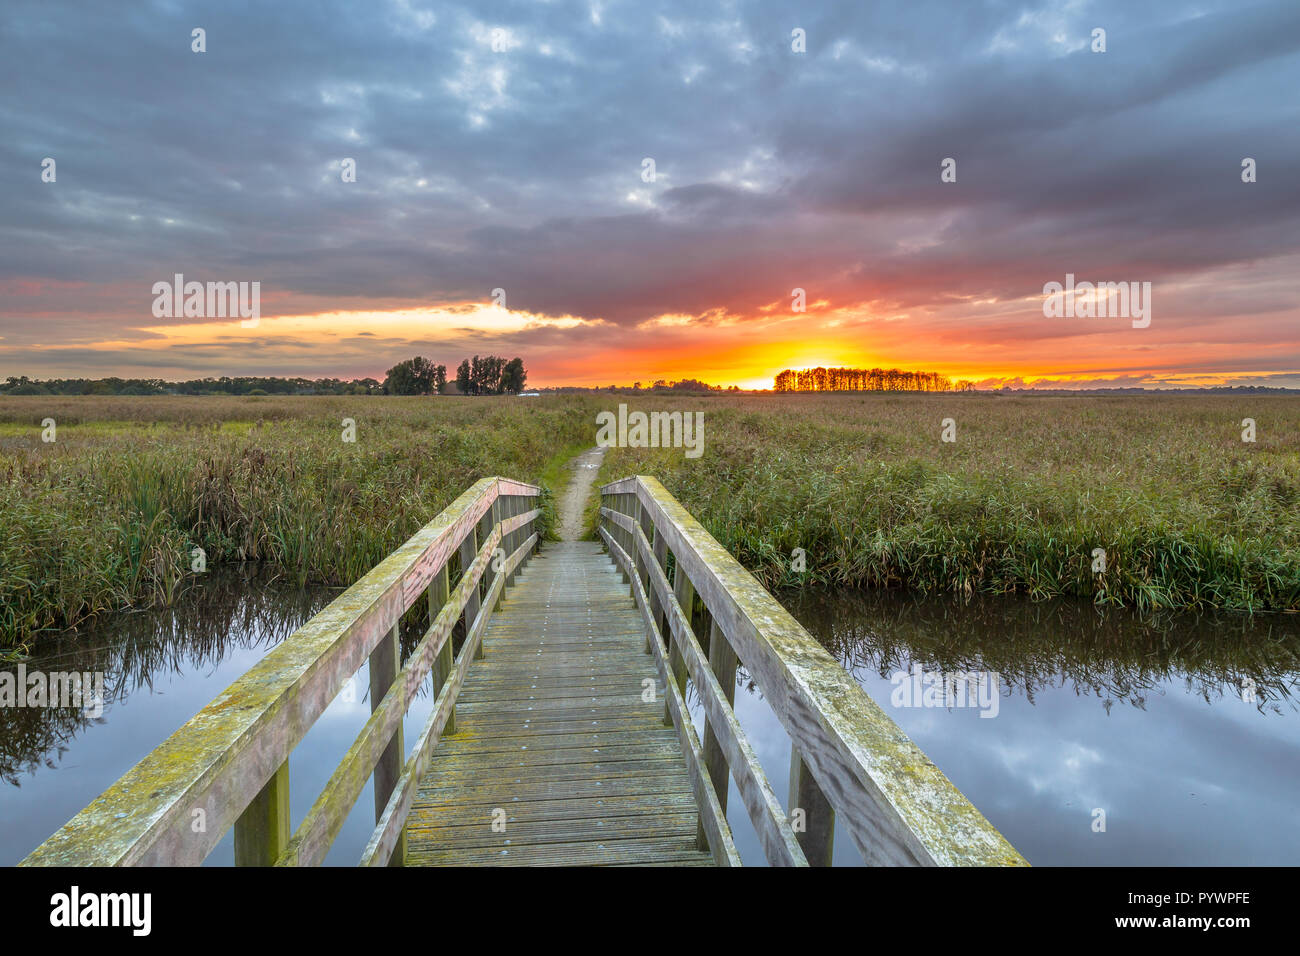 Wooden bridge towards sunset as a concept for adventure and exploration Stock Photo